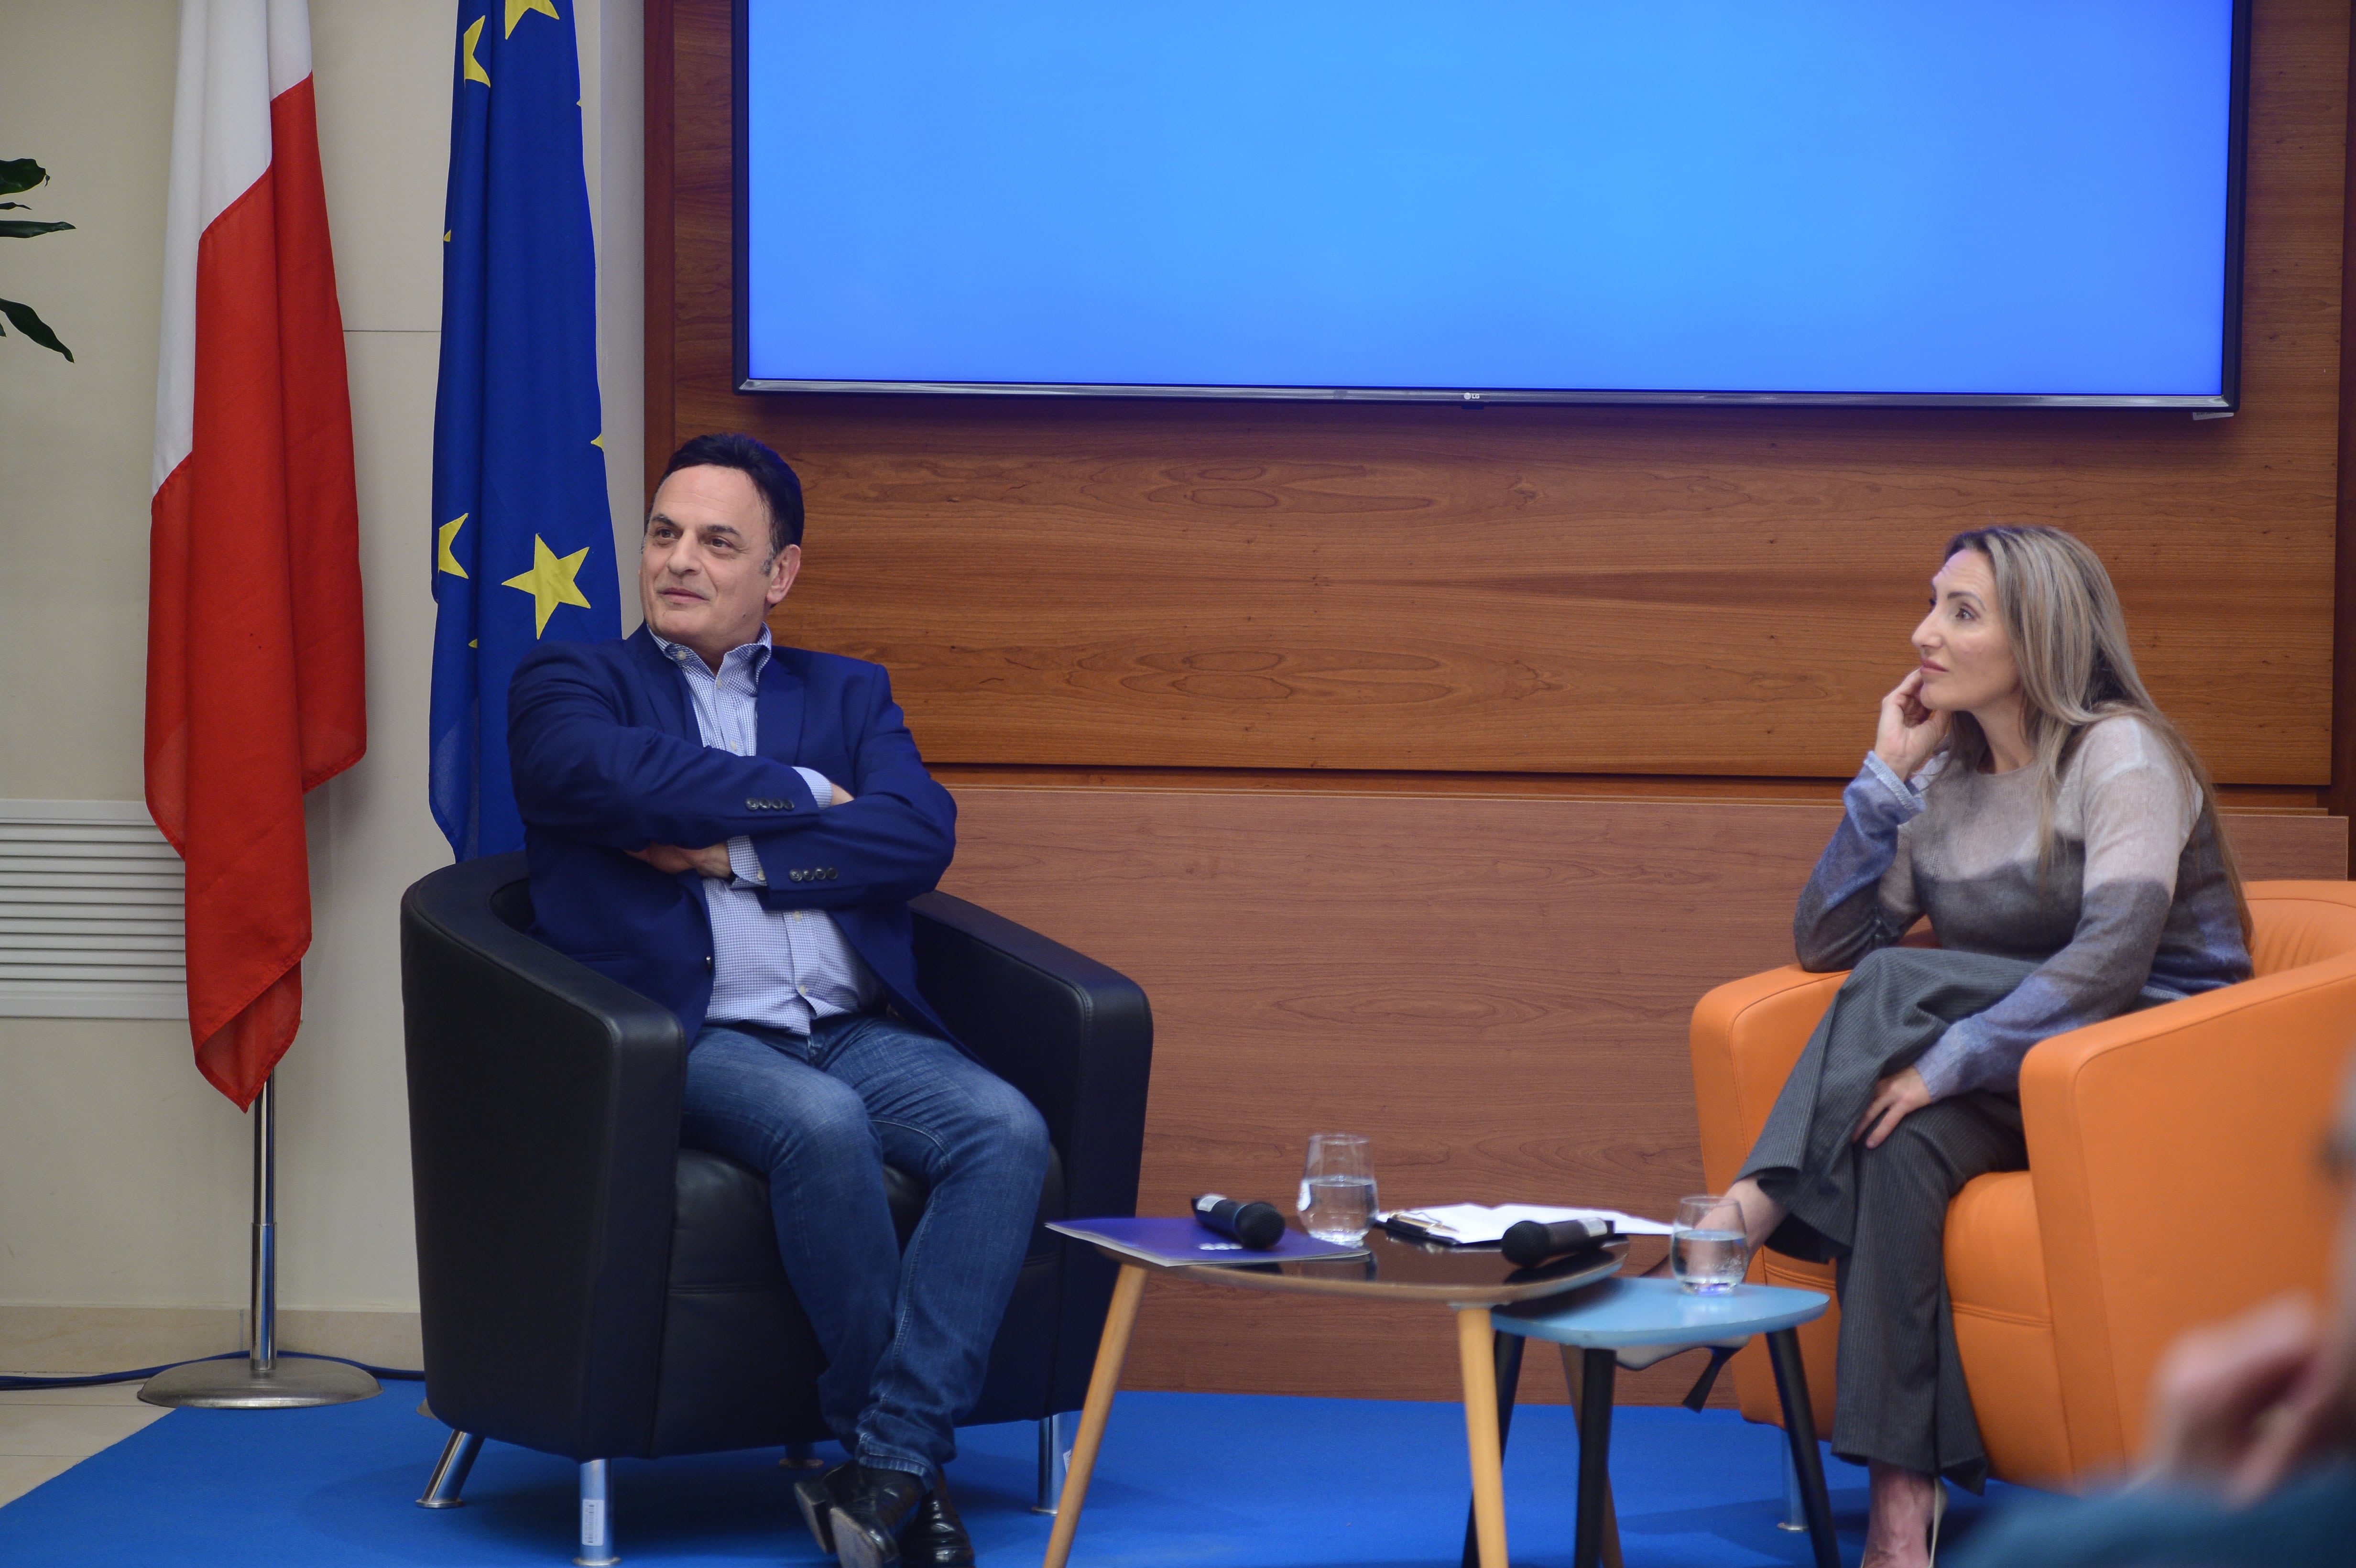 MEP David Casa and Claire Agius Ordway at the public discussion on "Strengthening the Rights of Europeans"